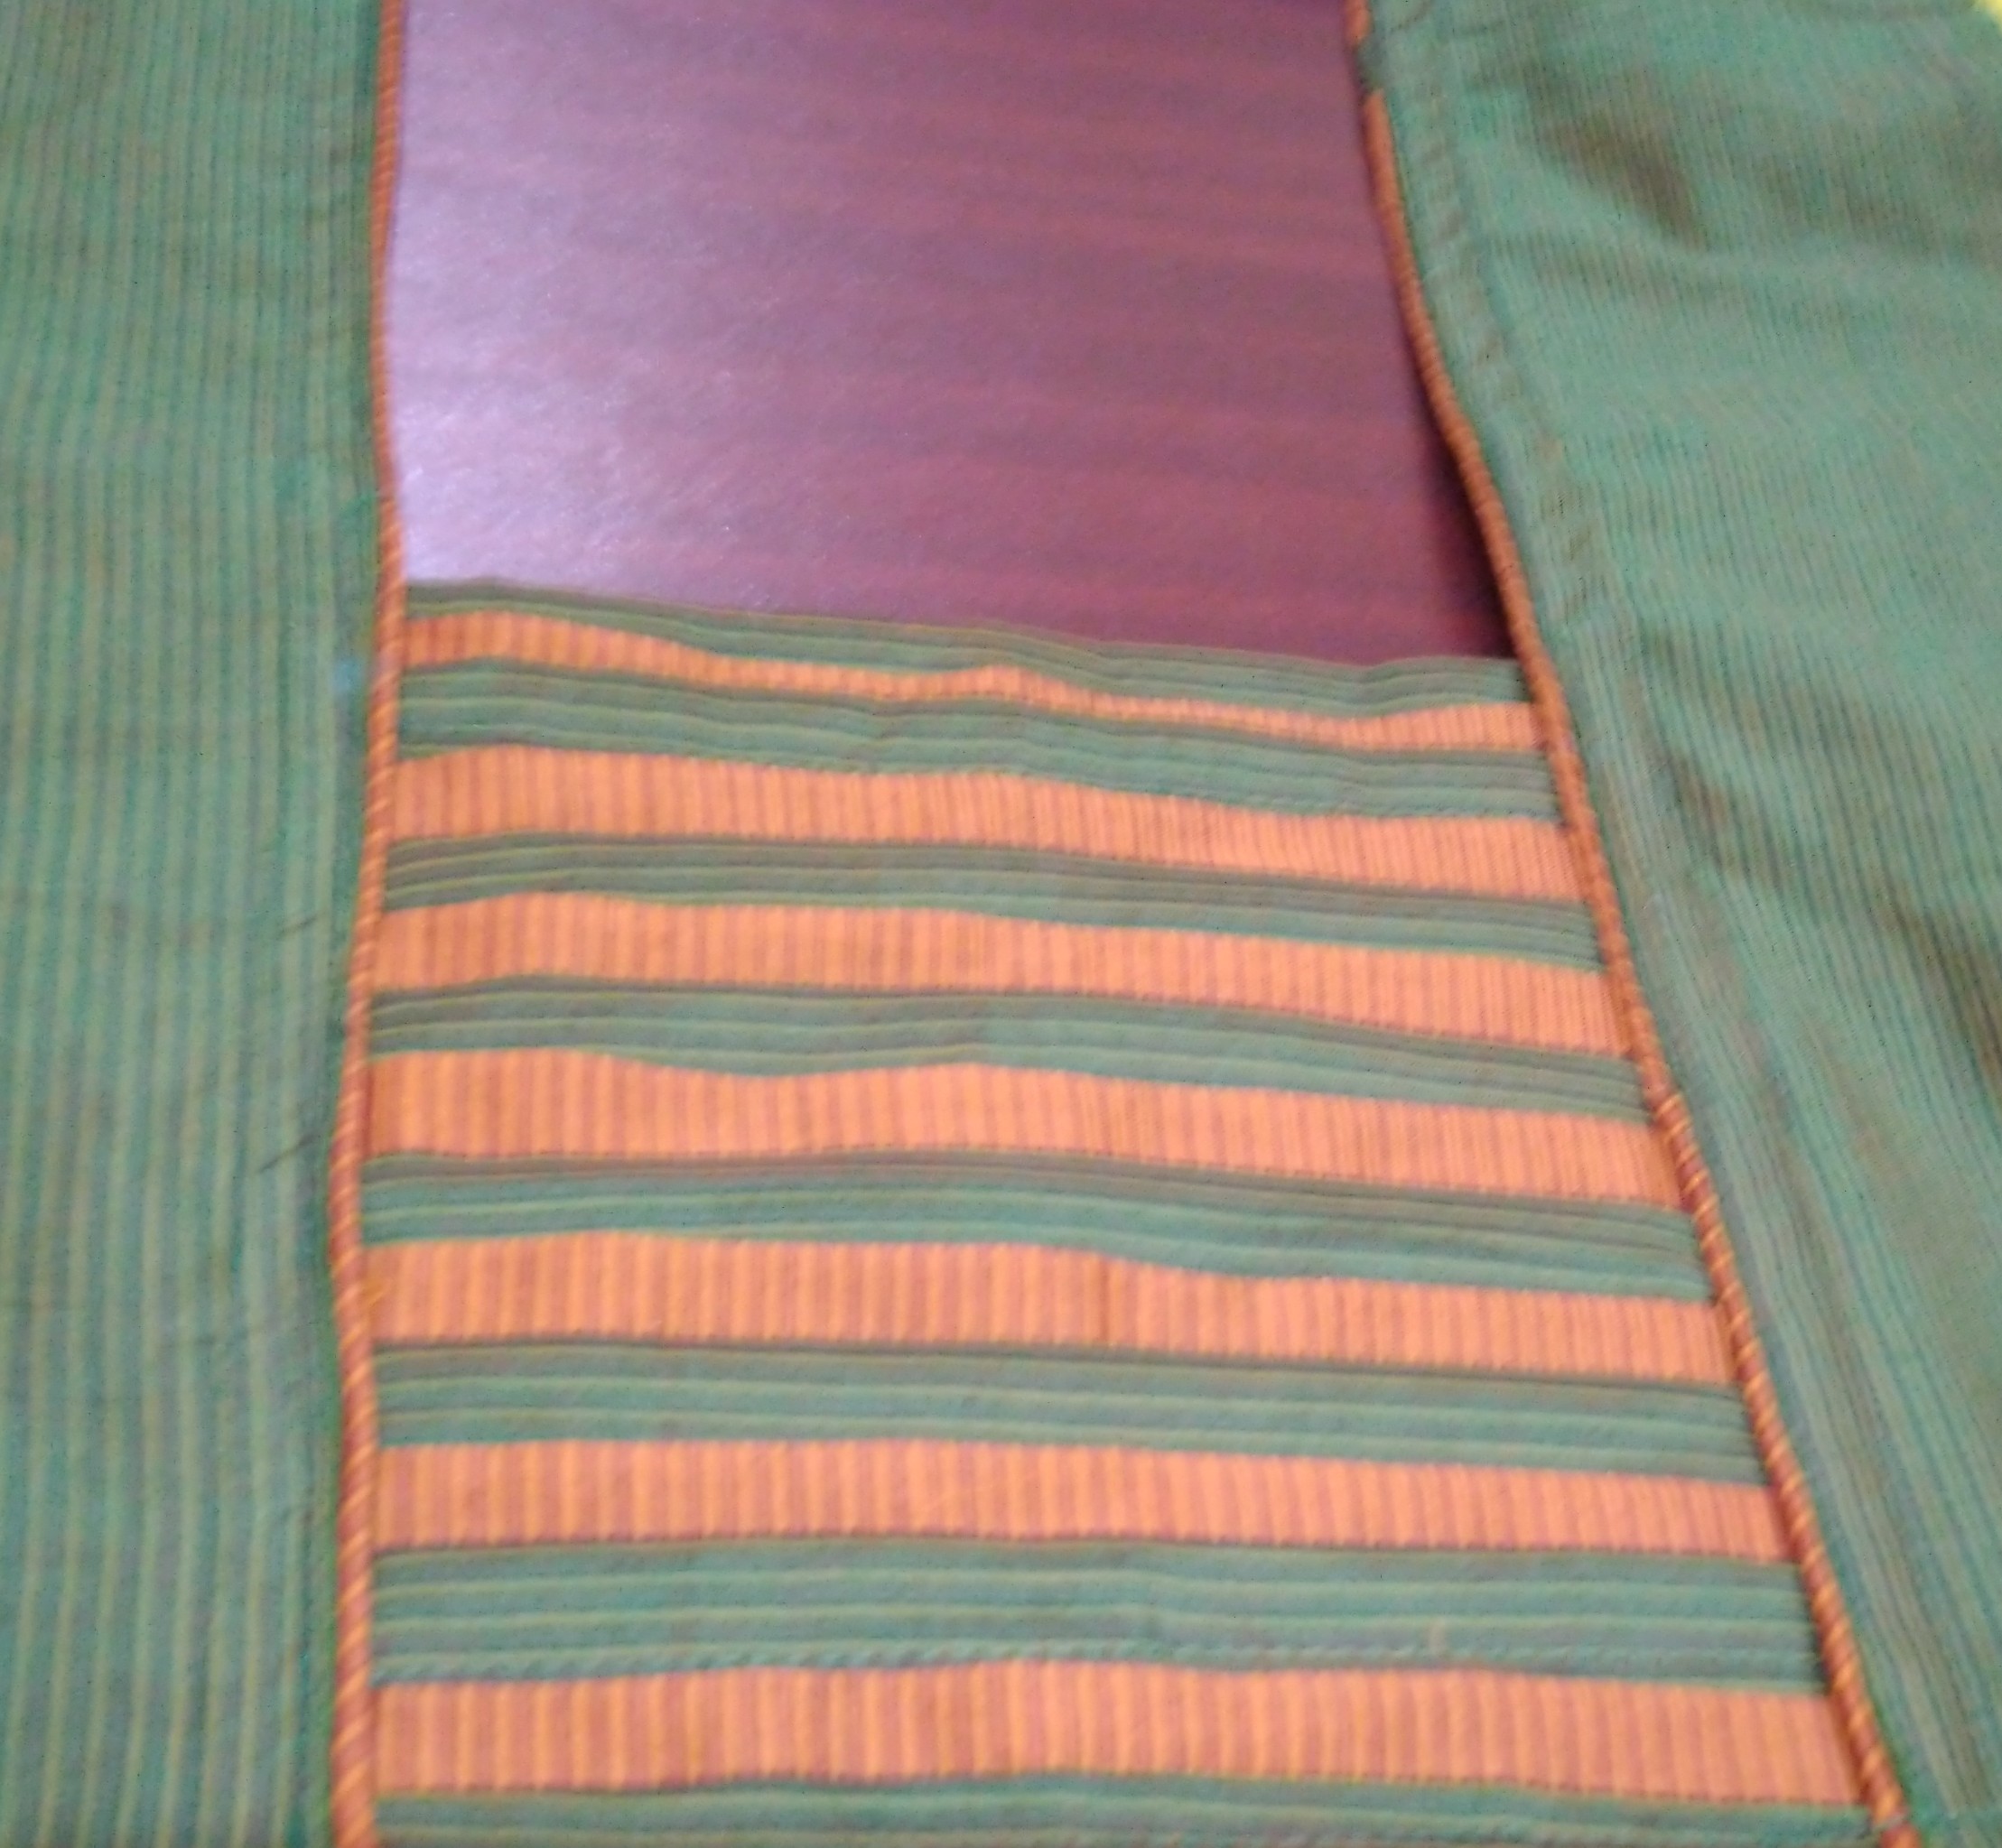 Layer neck with piping 2